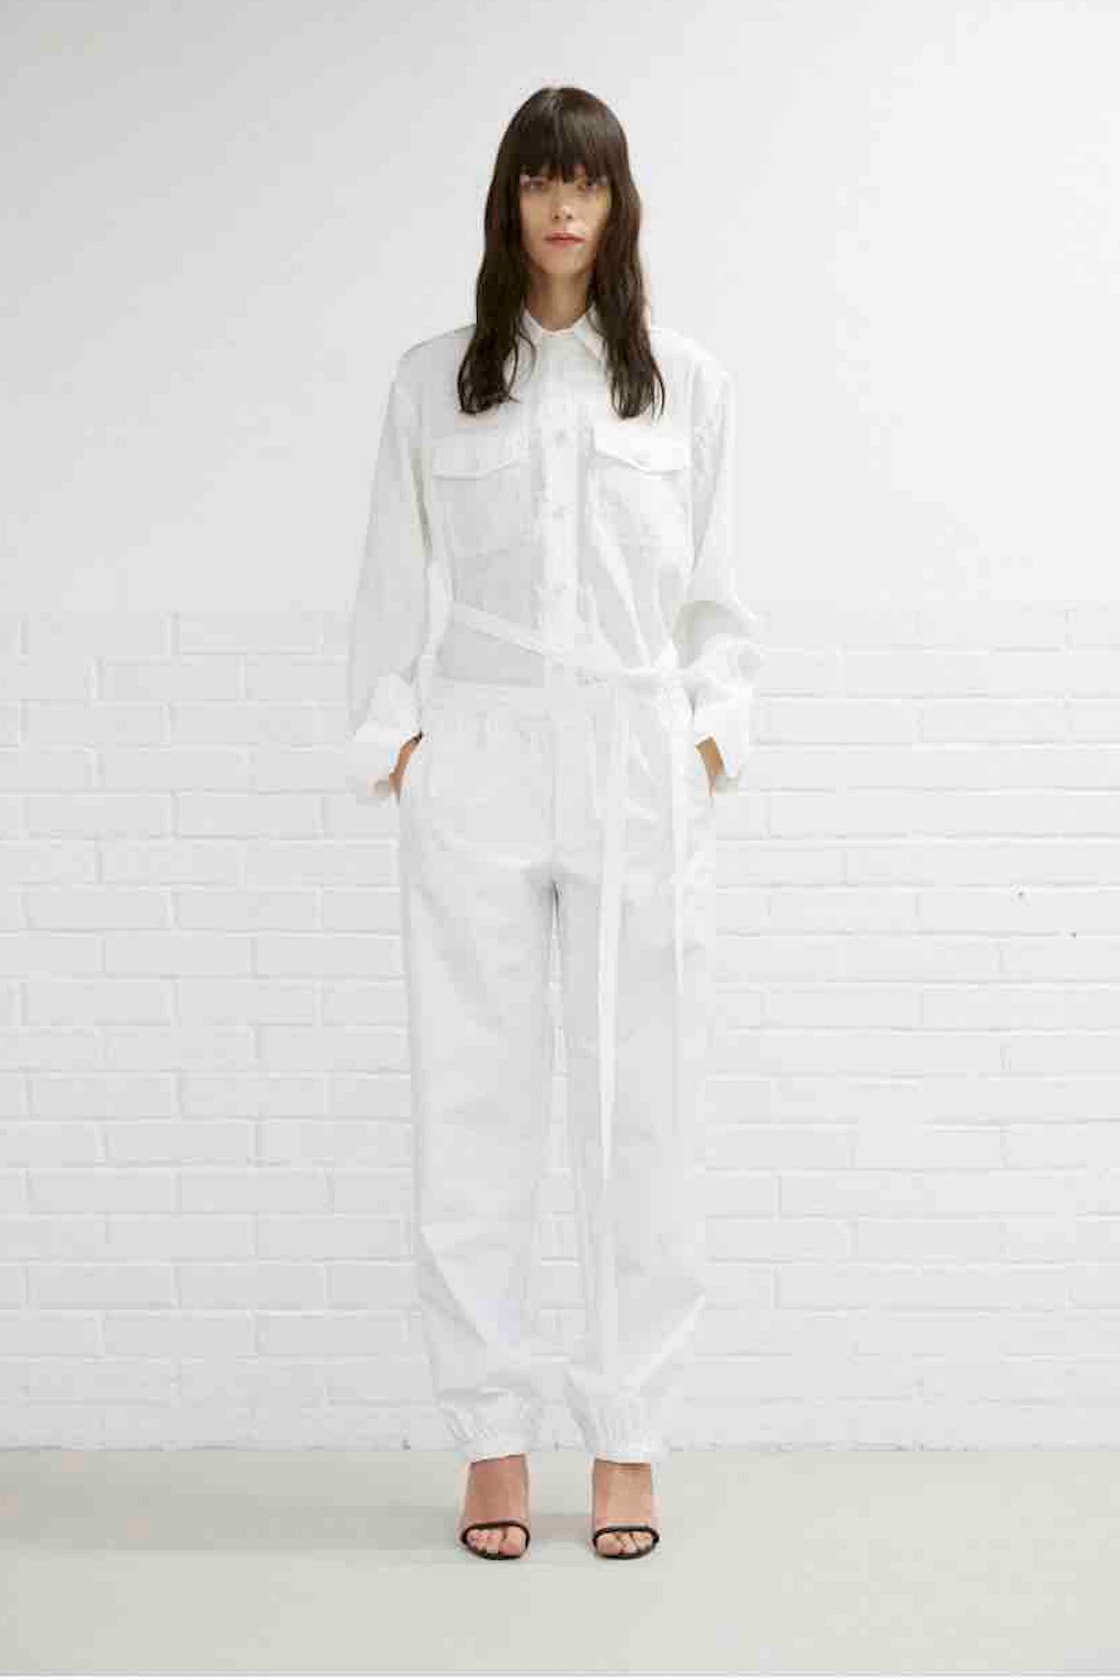 Helmut Lang Pre-Fall 2019 Lookbook Collection Minimal Muted Tones Utility Wear Workwear